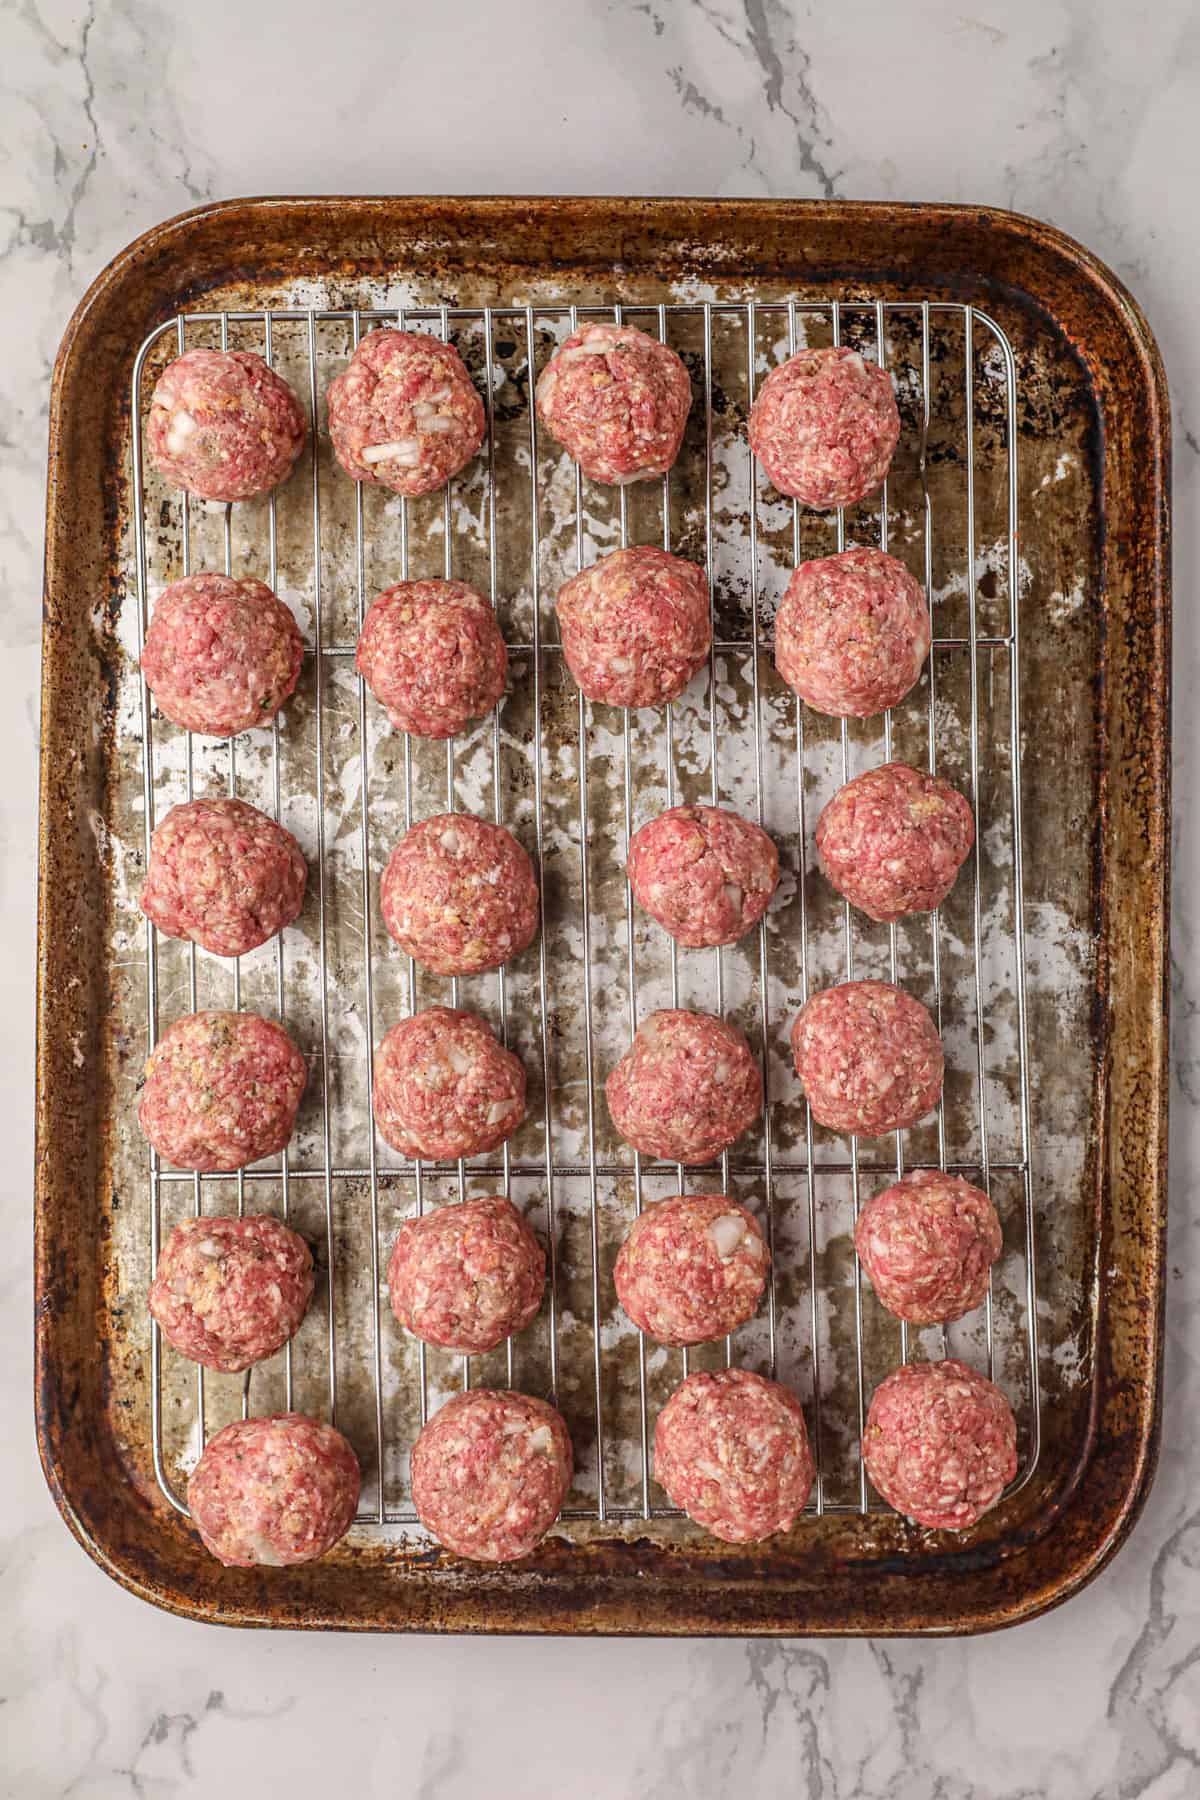 Forming meatballs around string cheese chunks and arranging on wire rack for Smoked Stuffed Meatballs recipe